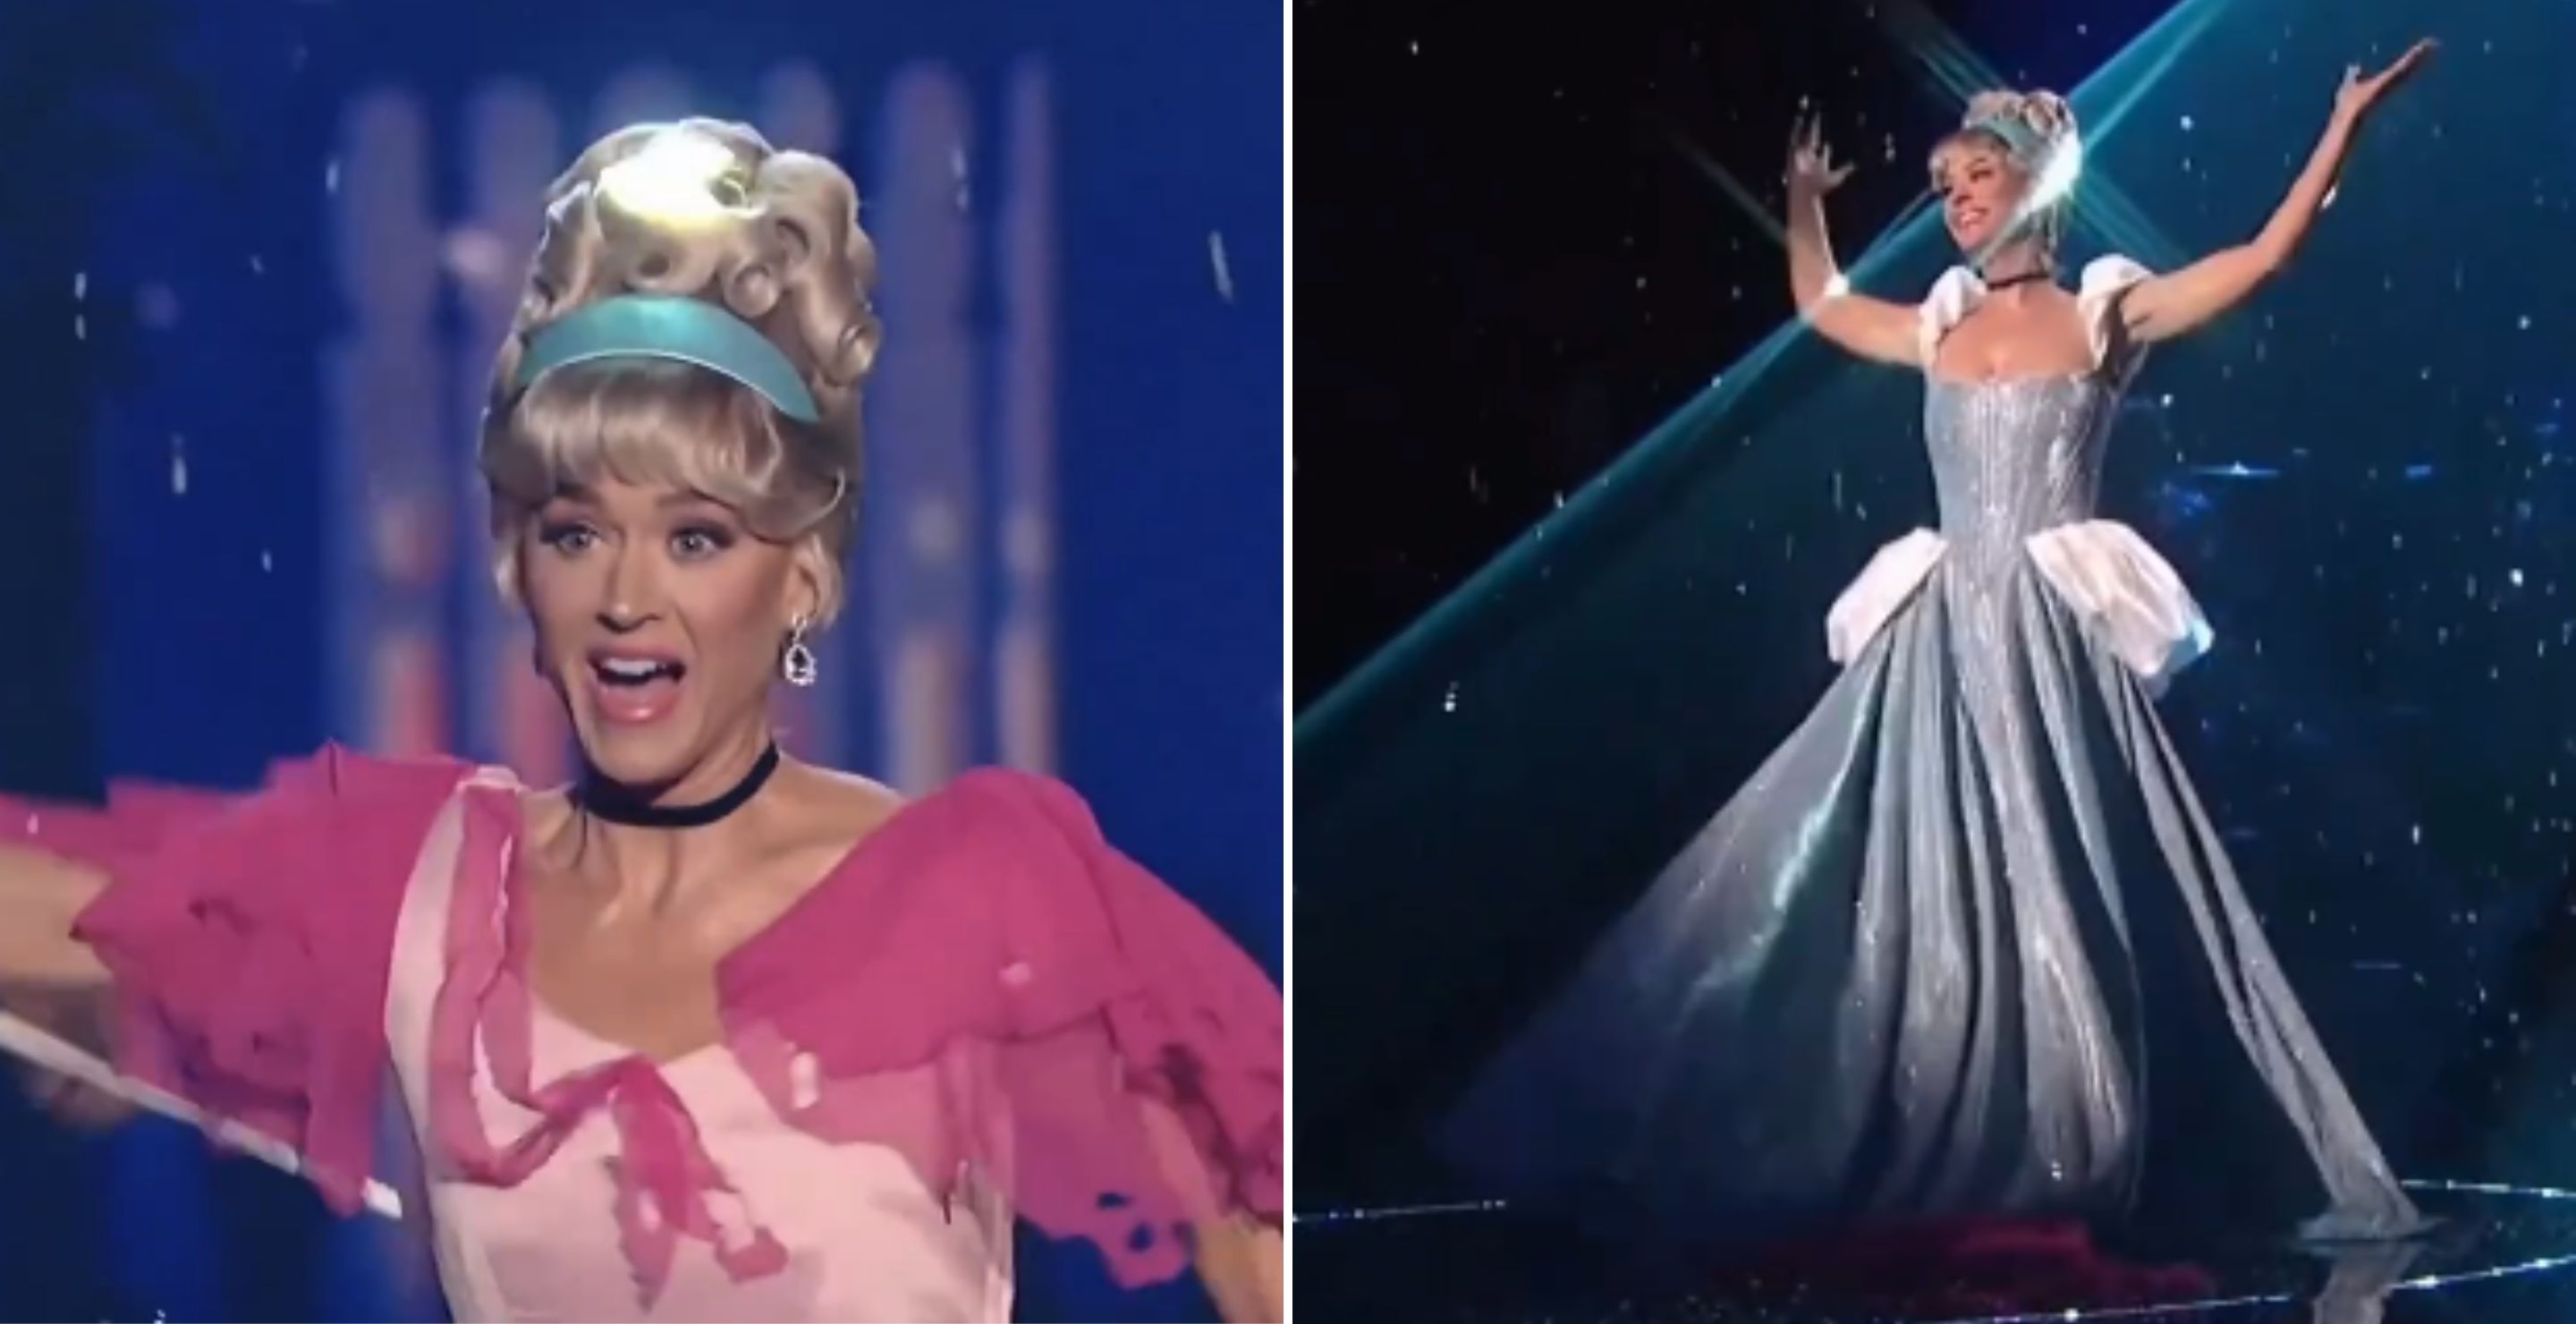 Fans Lose Their Minds Over Katy Perry's Cinderella Transformation On 'American Idol'